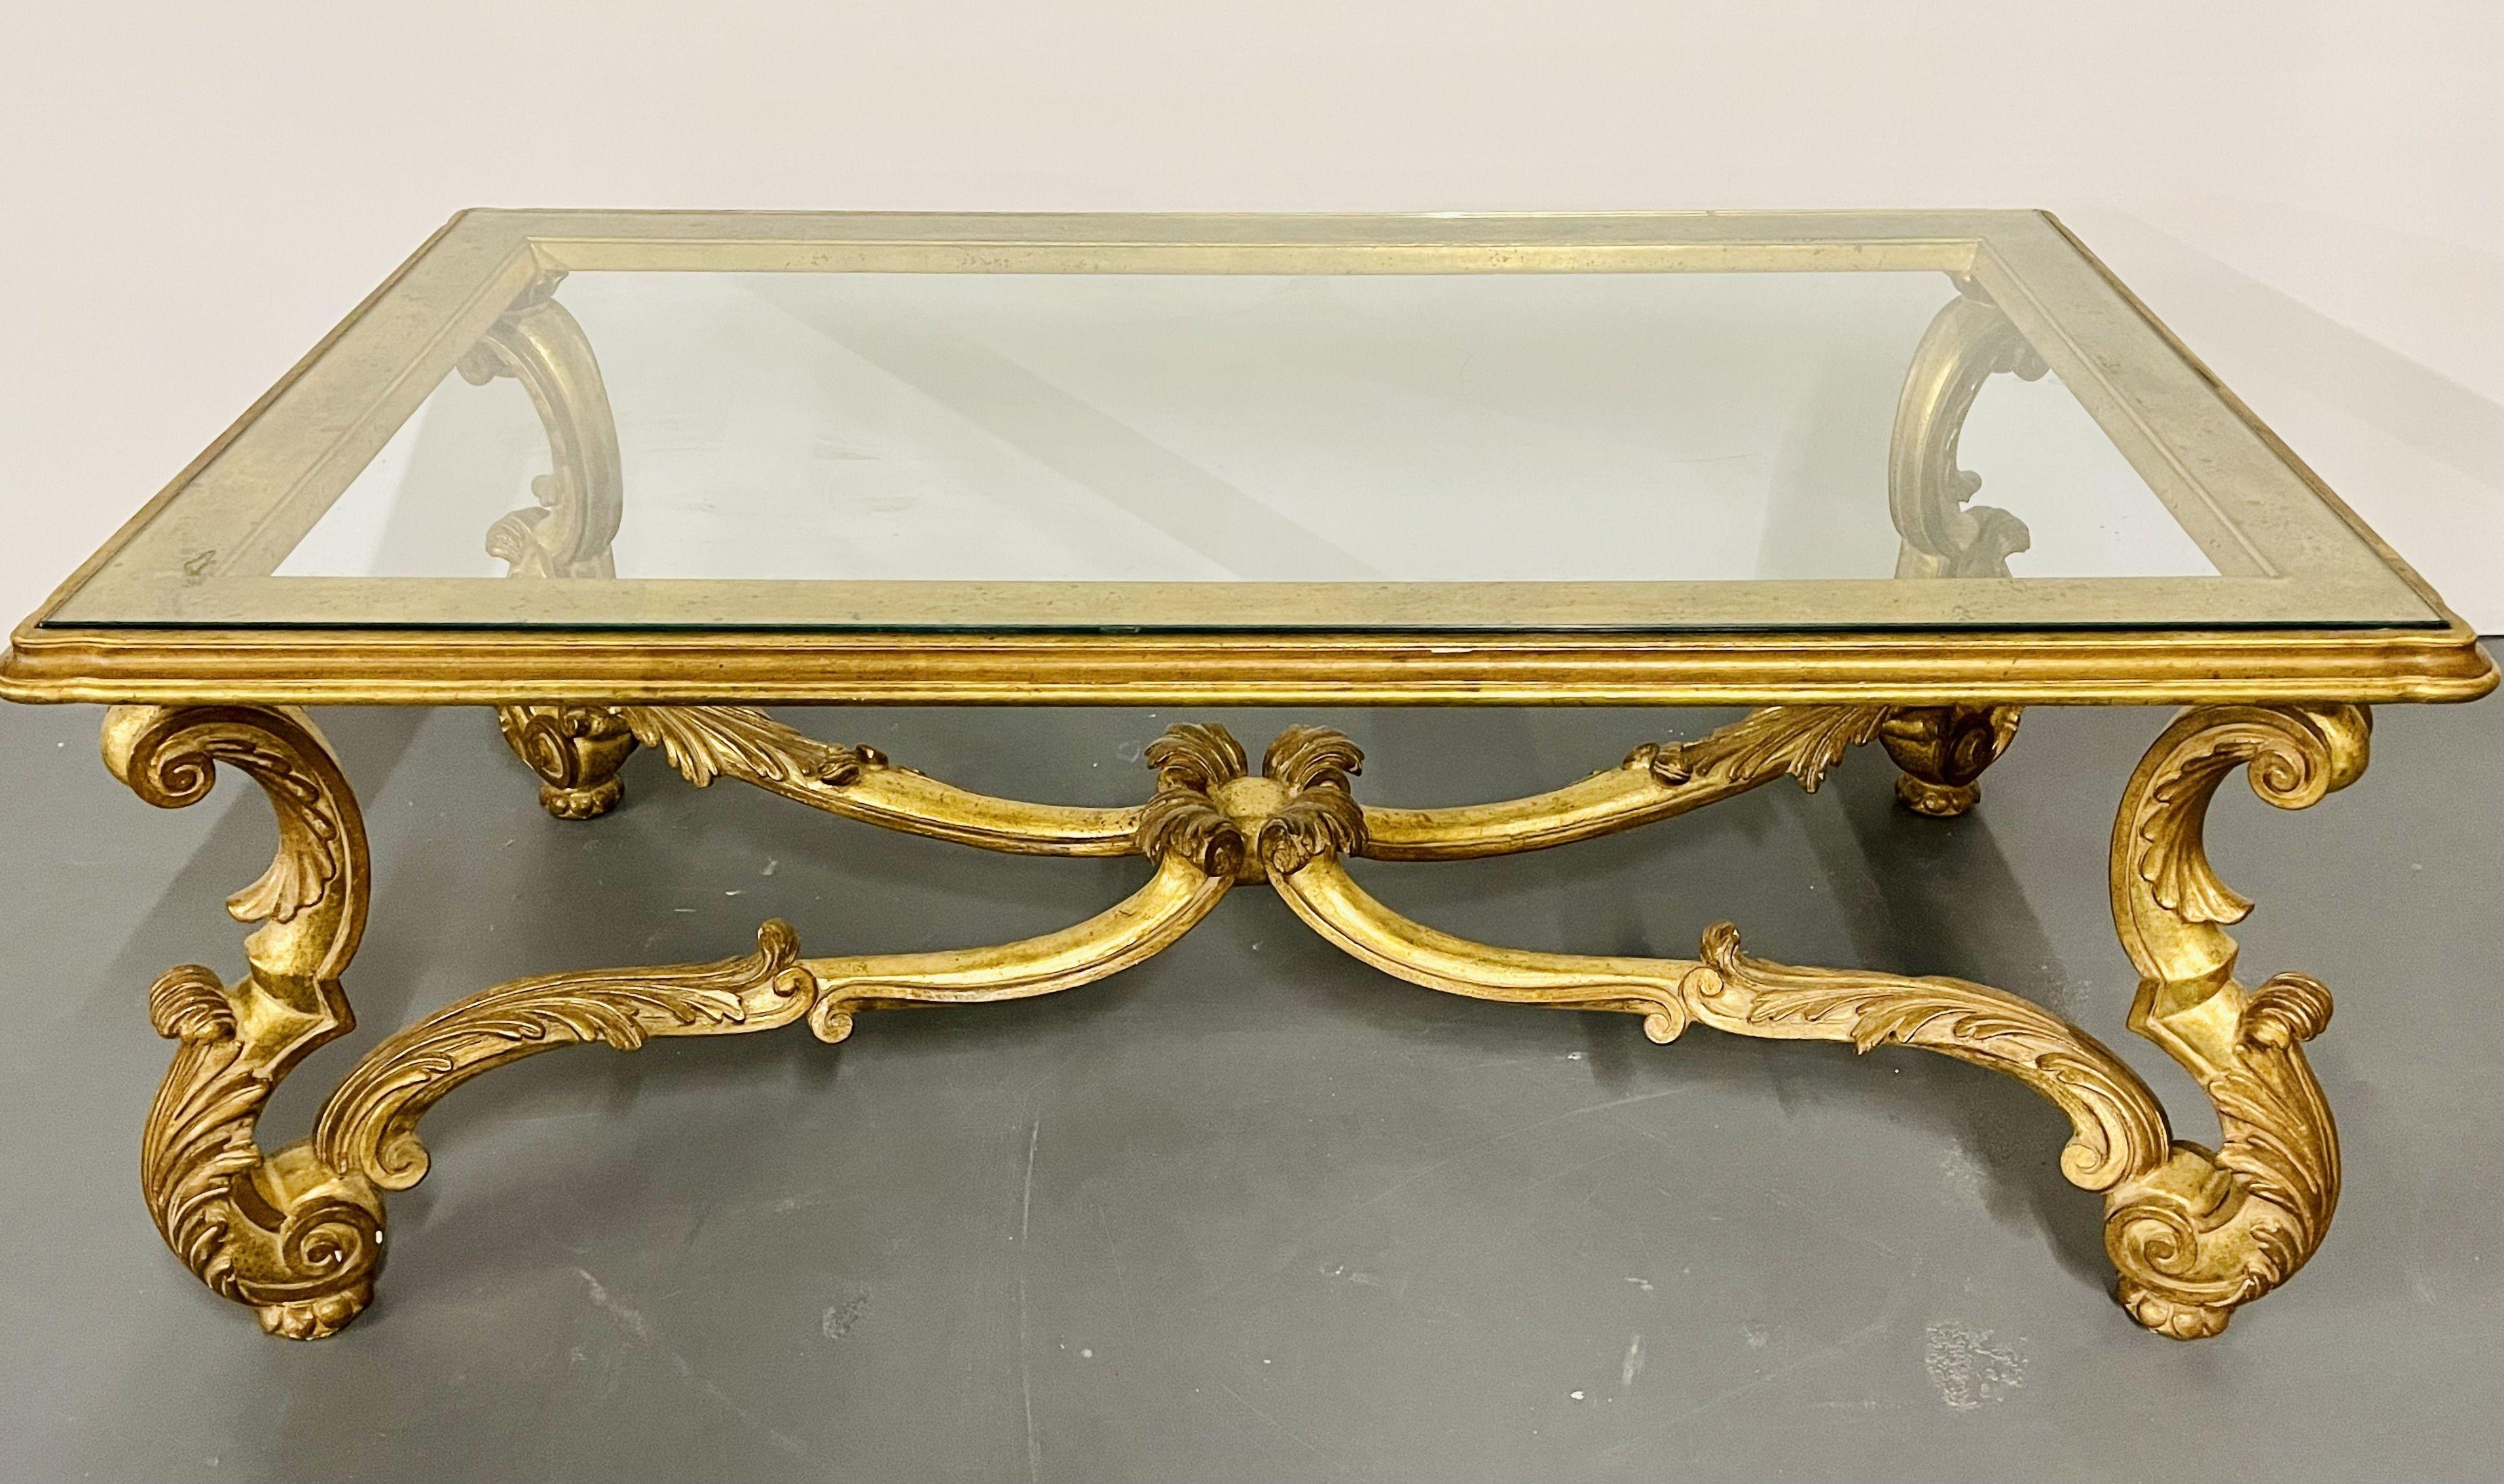 20th Century Italian Carved Glass Top Coffee Table, Gilt Wood, Hollywood Regency, Mid Cent For Sale